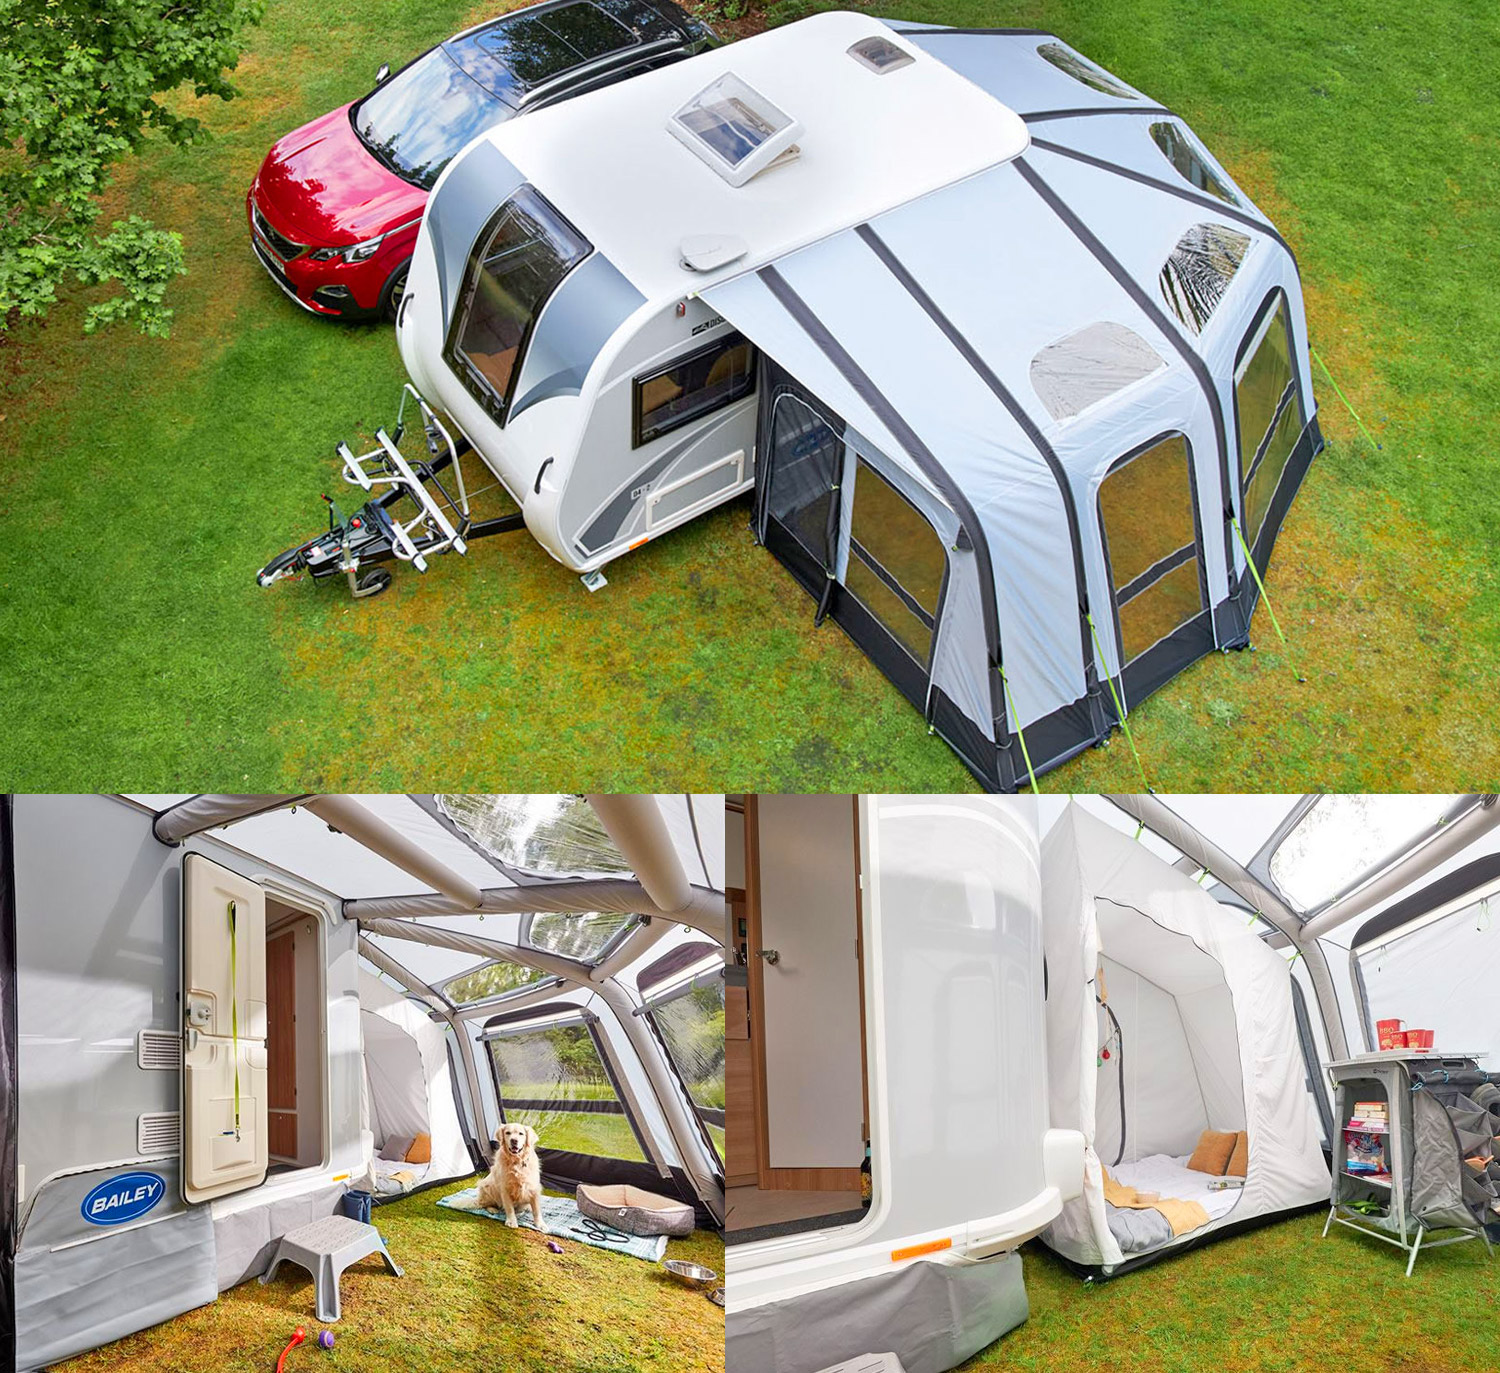 Bailey Discovery D4-2 Camper Trailer Has an Inflatable Enclosed Awning